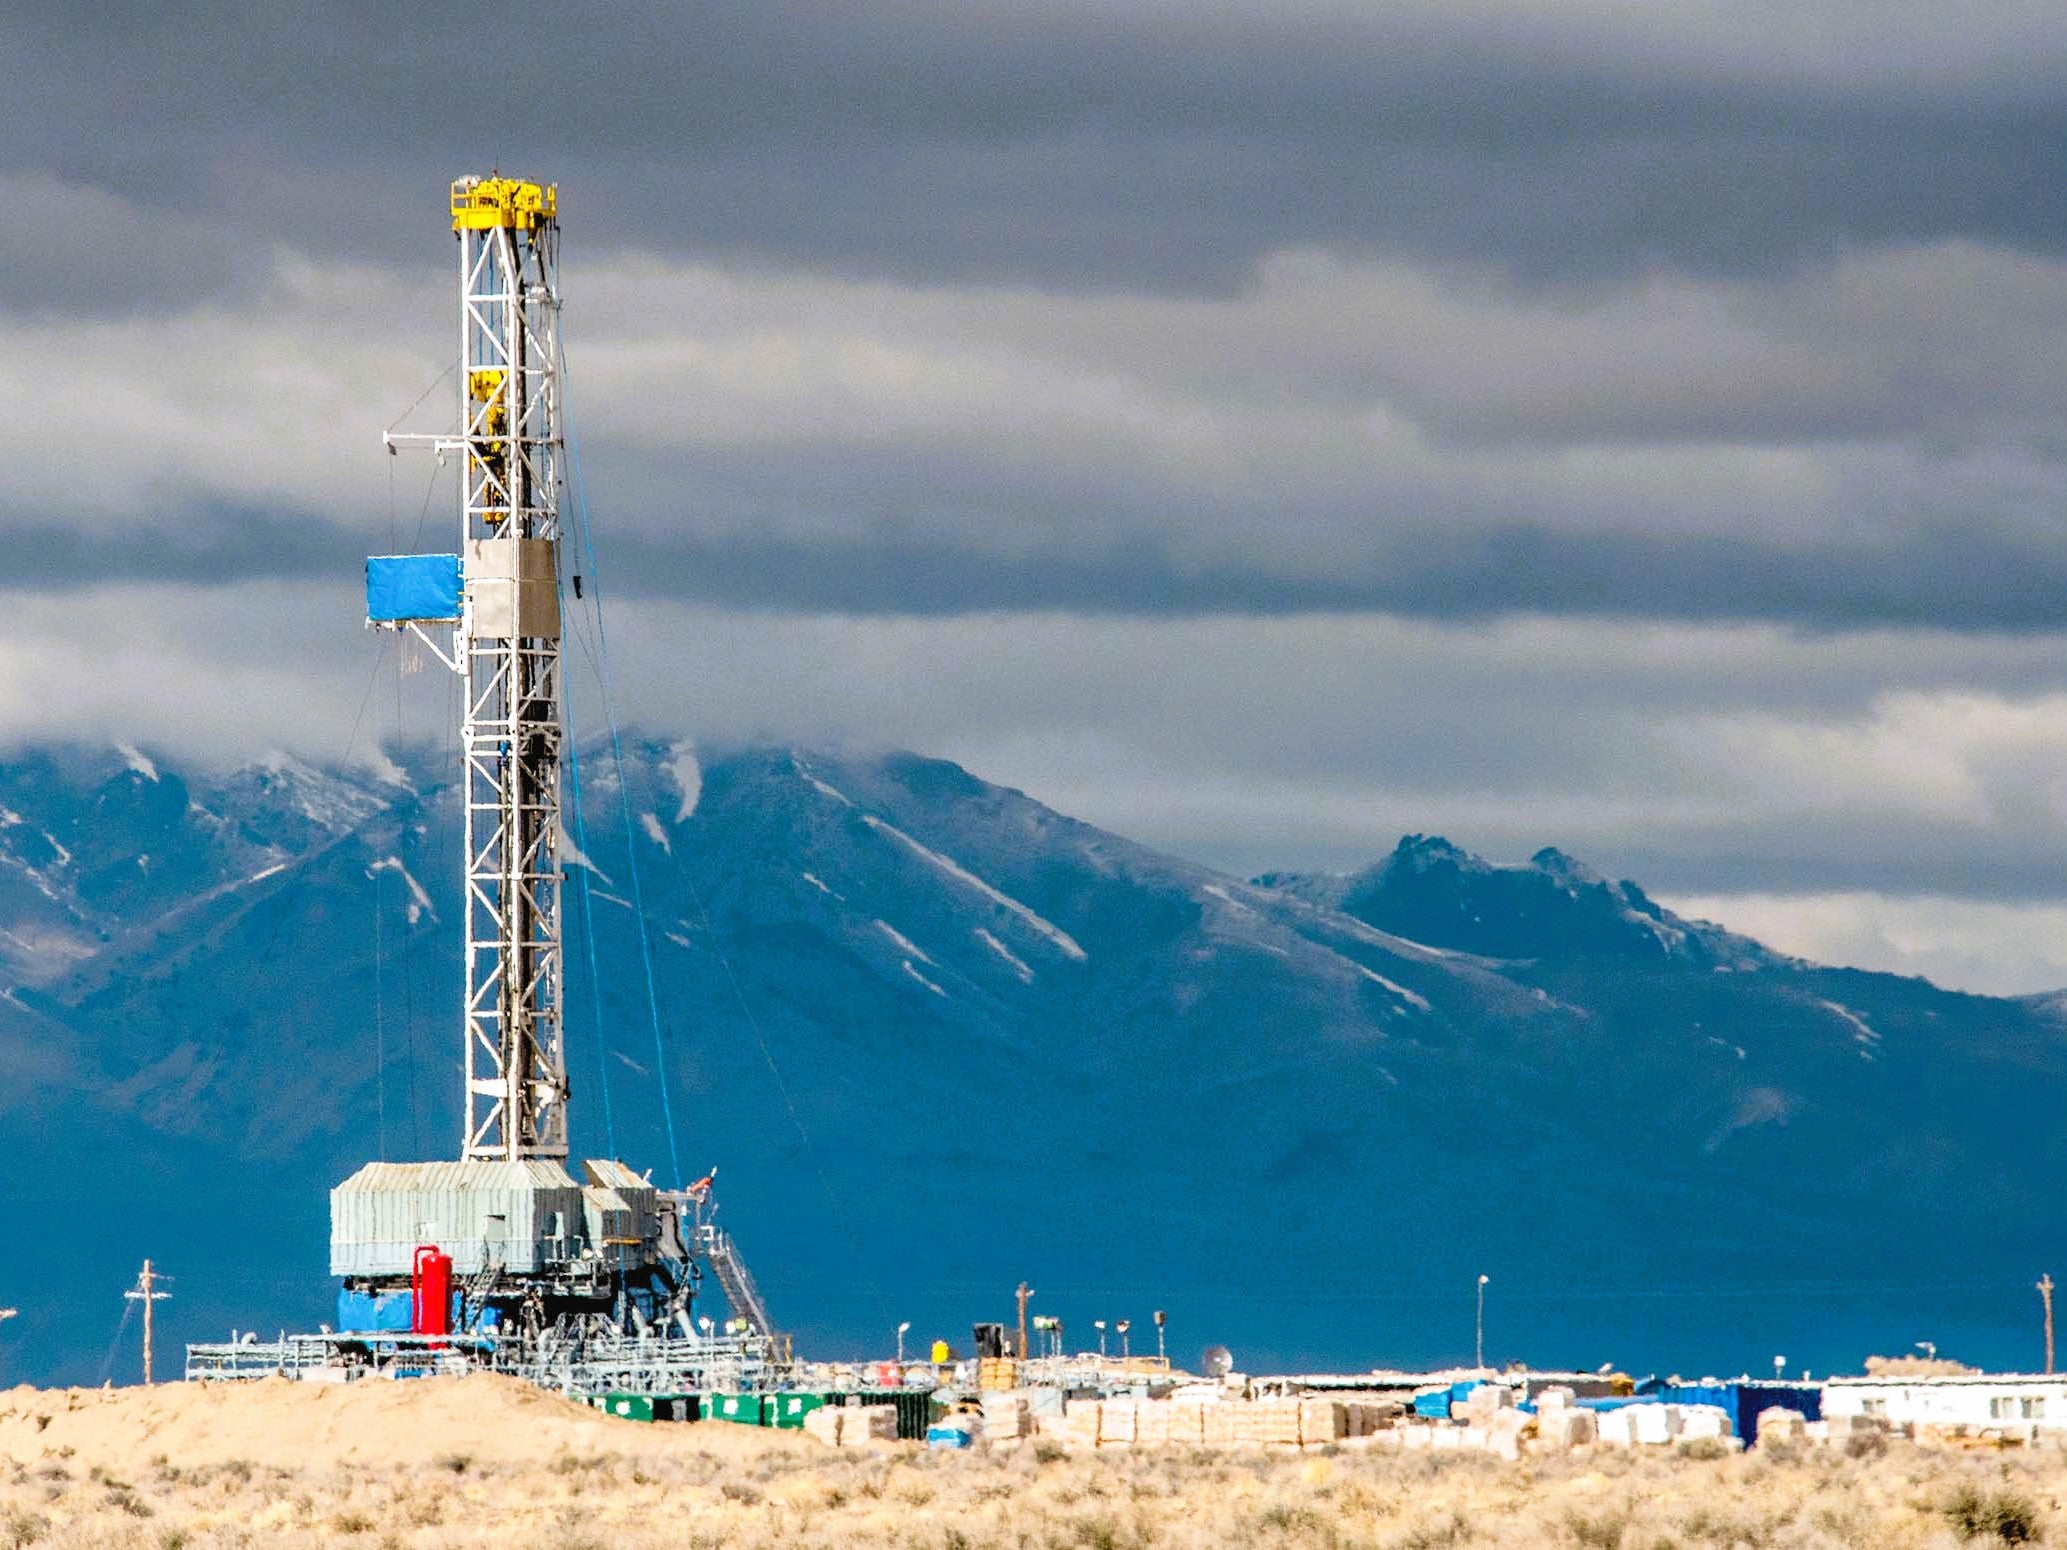 Fervo Energy uses oil drilling equipment to tap clean geothermal energy